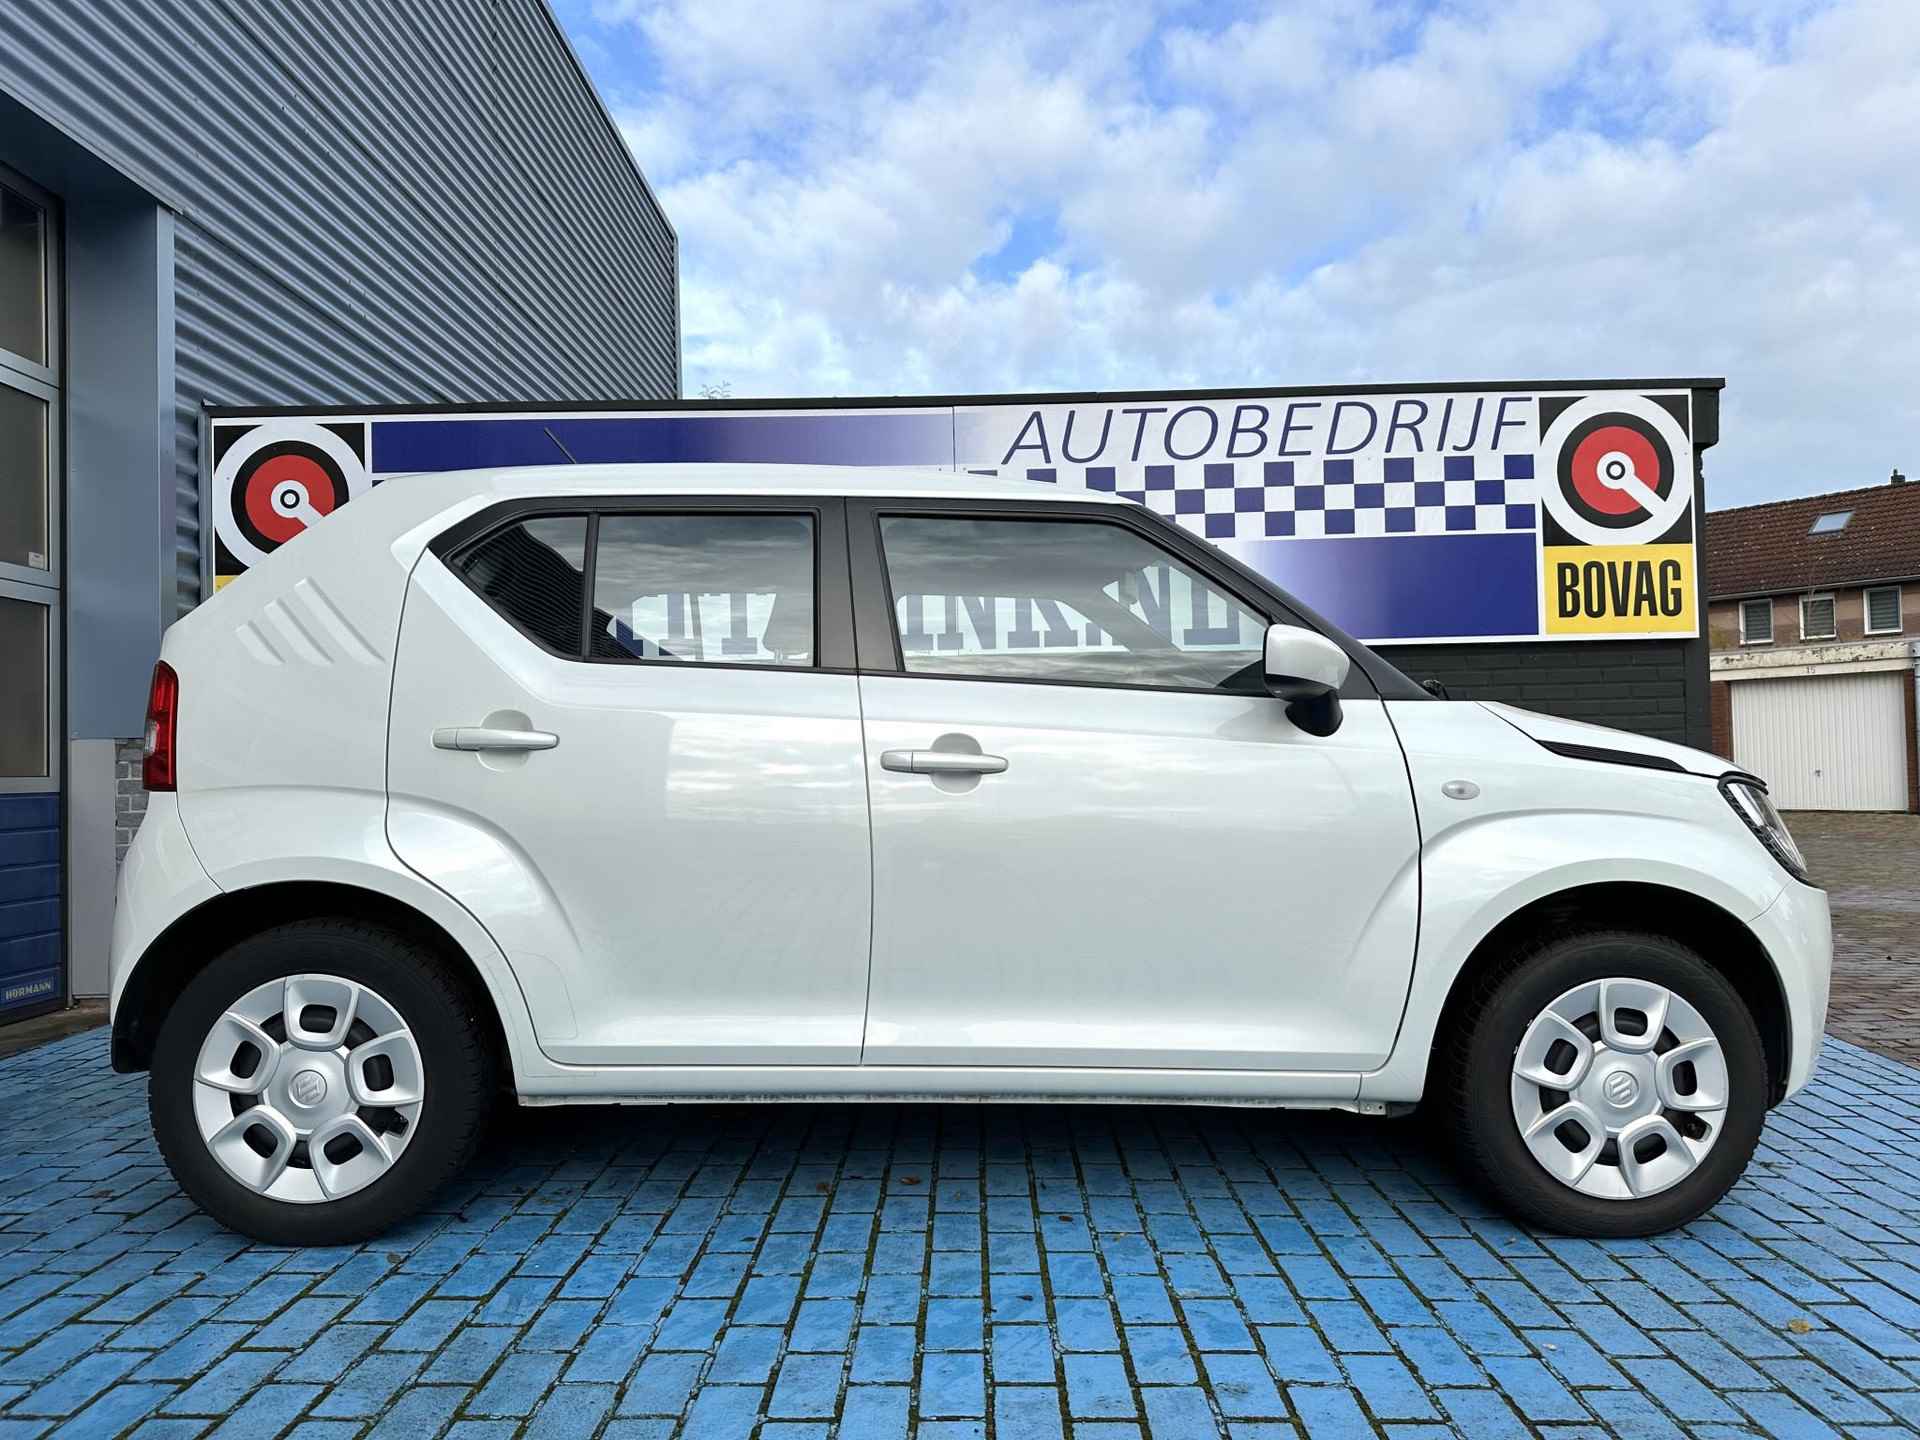 Suzuki Ignis 1.2 Comfort PDC V+A HOGE INSTAP AIRCO PDC BOVAG - 7/30